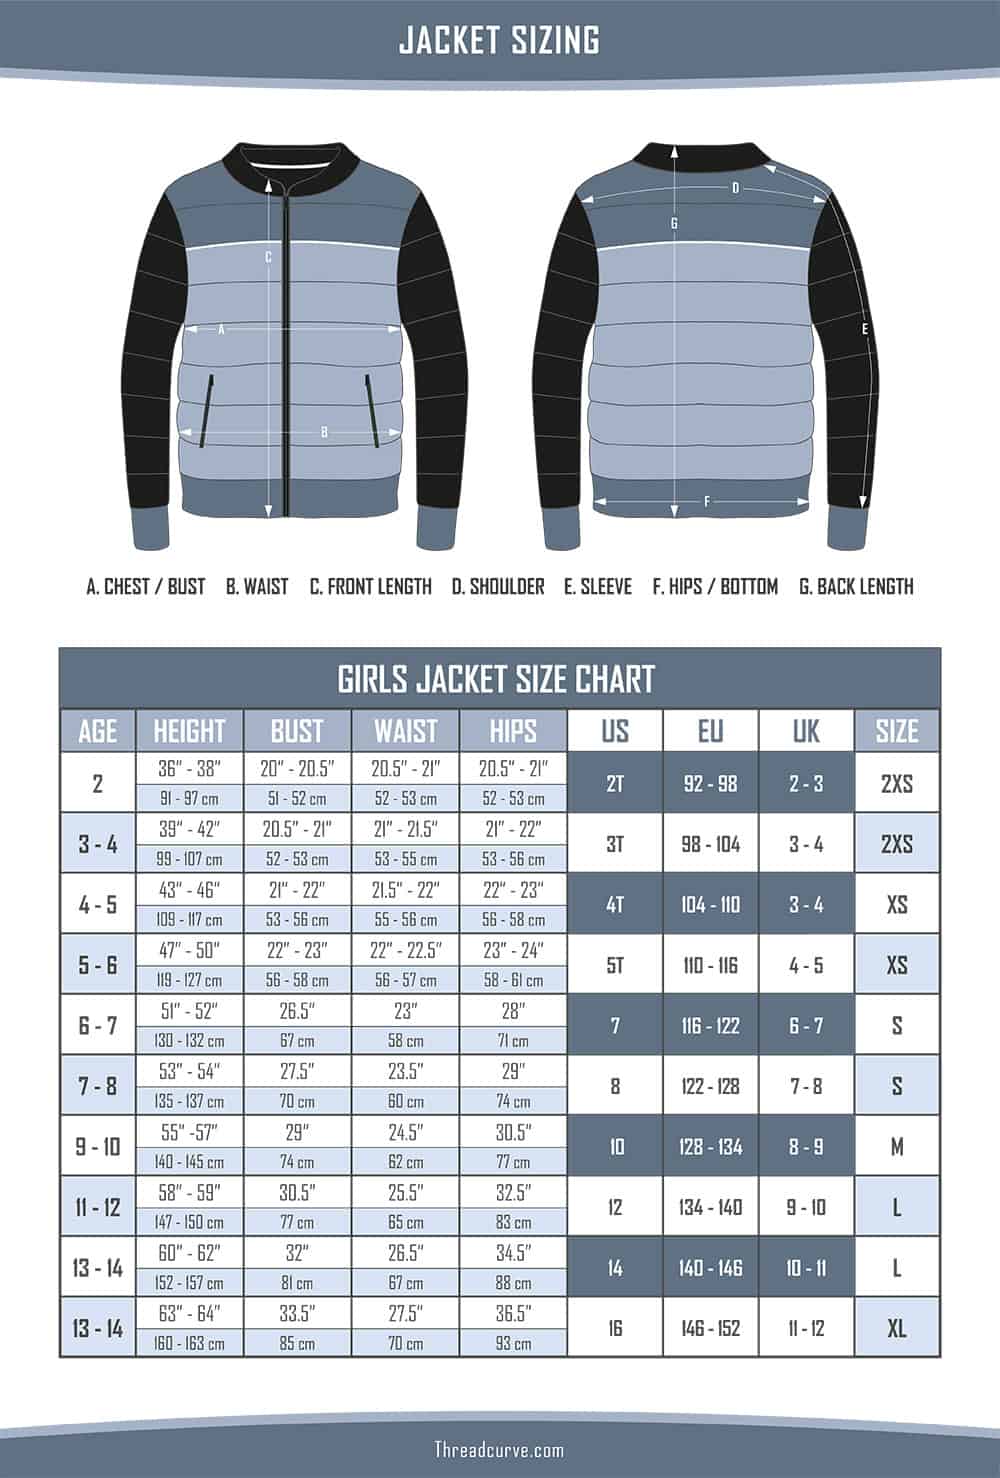 This is the chart for the Girls Jackets Sizes.